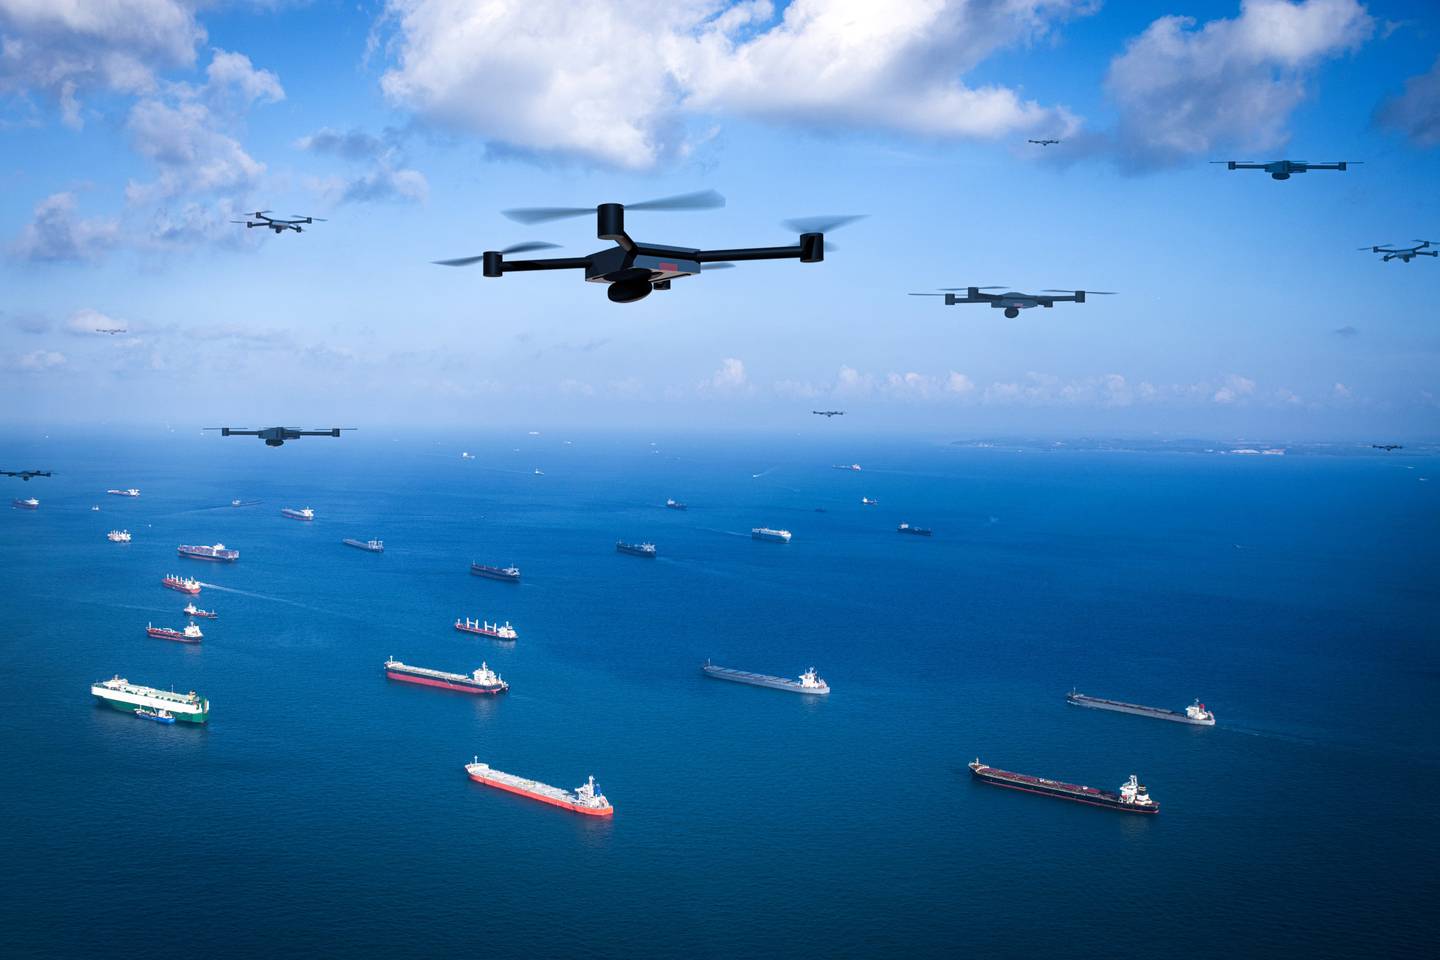 Competitors can use between five and 20 drones to survey a defined area, which will have fewer than 10 vessels. Photo: Aspire.
